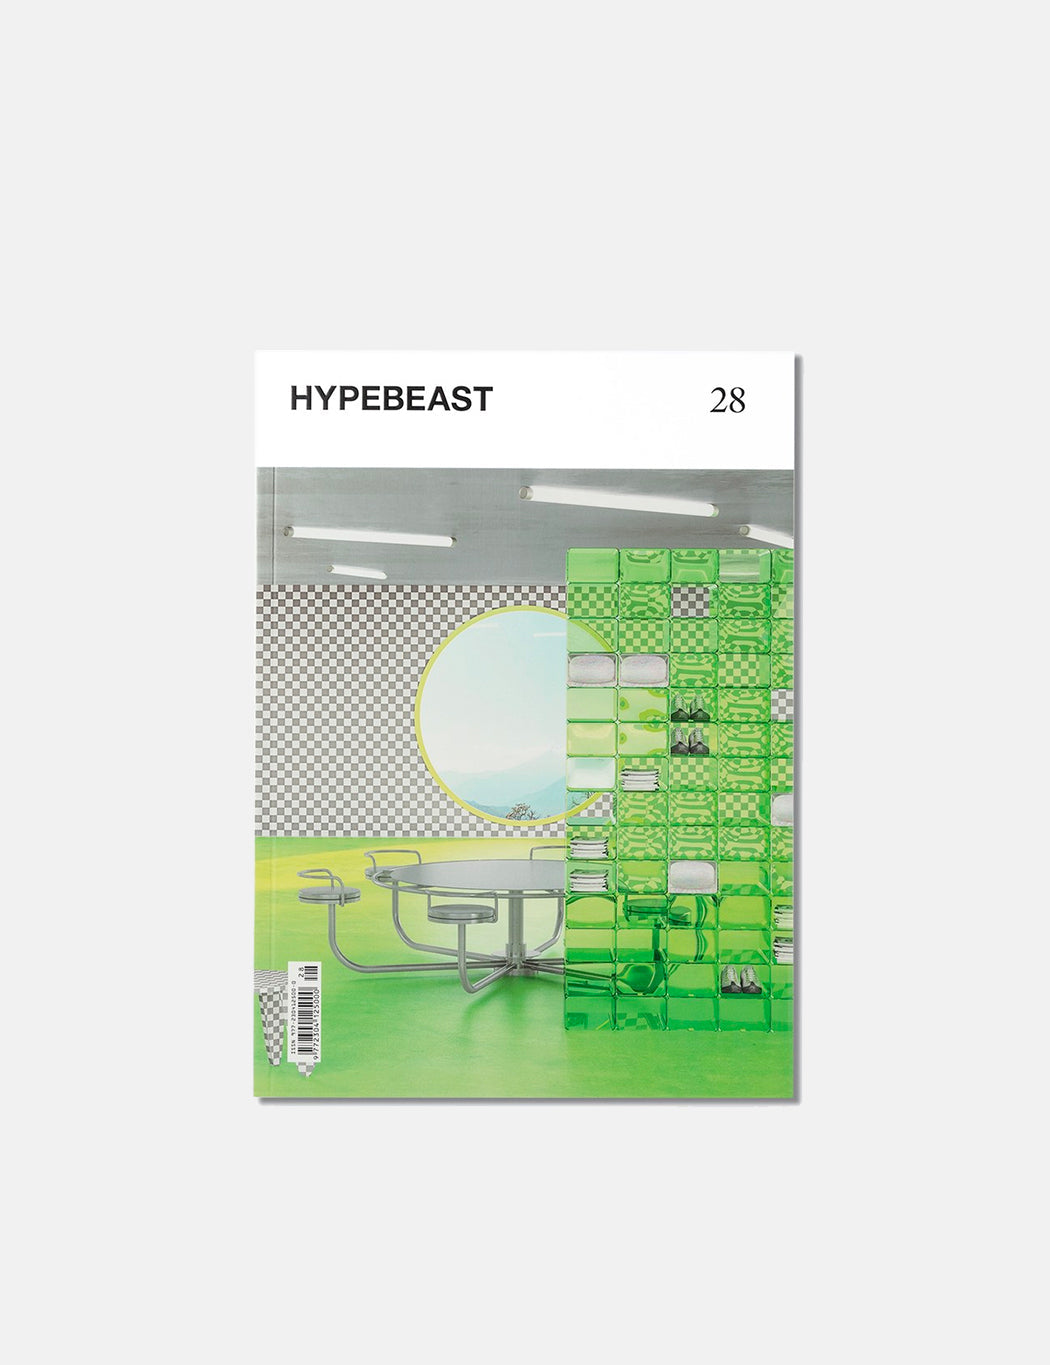 Hypebeast Magazine (The Ignition Issue) #28